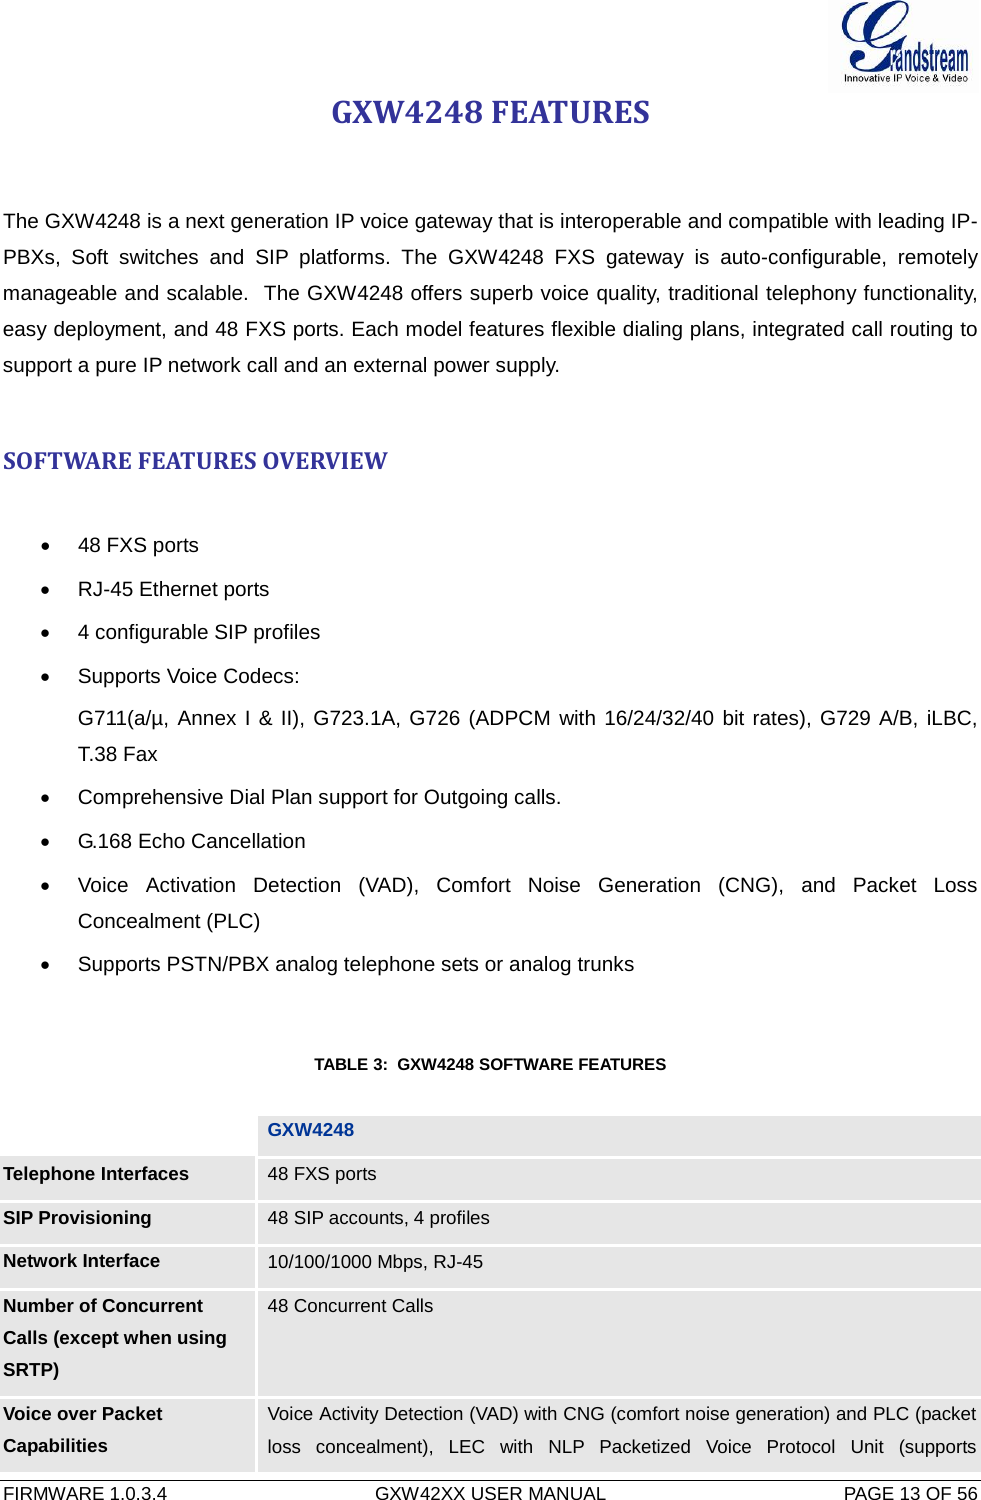  FIRMWARE 1.0.3.4  GXW42XX USER MANUAL  PAGE 13 OF 56      GXW4248 FEATURES  The GXW4248 is a next generation IP voice gateway that is interoperable and compatible with leading IP-PBXs,  Soft  switches and SIP platforms. The GXW4248 FXS gateway is auto-configurable, remotely manageable and scalable.  The GXW4248 offers superb voice quality, traditional telephony functionality, easy deployment, and 48 FXS ports. Each model features flexible dialing plans, integrated call routing to support a pure IP network call and an external power supply.    SOFTWARE FEATURES OVERVIEW  •  48 FXS ports  • RJ-45 Ethernet ports •  4 configurable SIP profiles  • Supports Voice Codecs:  G711(a/µ, Annex I &amp; II), G723.1A, G726 (ADPCM with 16/24/32/40  bit rates), G729 A/B, iLBC, T.38 Fax  • Comprehensive Dial Plan support for Outgoing calls. • G.168 Echo Cancellation • Voice Activation Detection (VAD), Comfort Noise Generation (CNG), and Packet Loss Concealment (PLC) • Supports PSTN/PBX analog telephone sets or analog trunks  TABLE 3:  GXW4248 SOFTWARE FEATURES   GXW4248 Telephone Interfaces 48 FXS ports SIP Provisioning 48 SIP accounts, 4 profiles Network Interface 10/100/1000 Mbps, RJ-45 Number of Concurrent Calls (except when using SRTP) 48 Concurrent Calls Voice over Packet Capabilities Voice Activity Detection (VAD) with CNG (comfort noise generation) and PLC (packet loss concealment), LEC with NLP Packetized Voice Protocol Unit (supports 